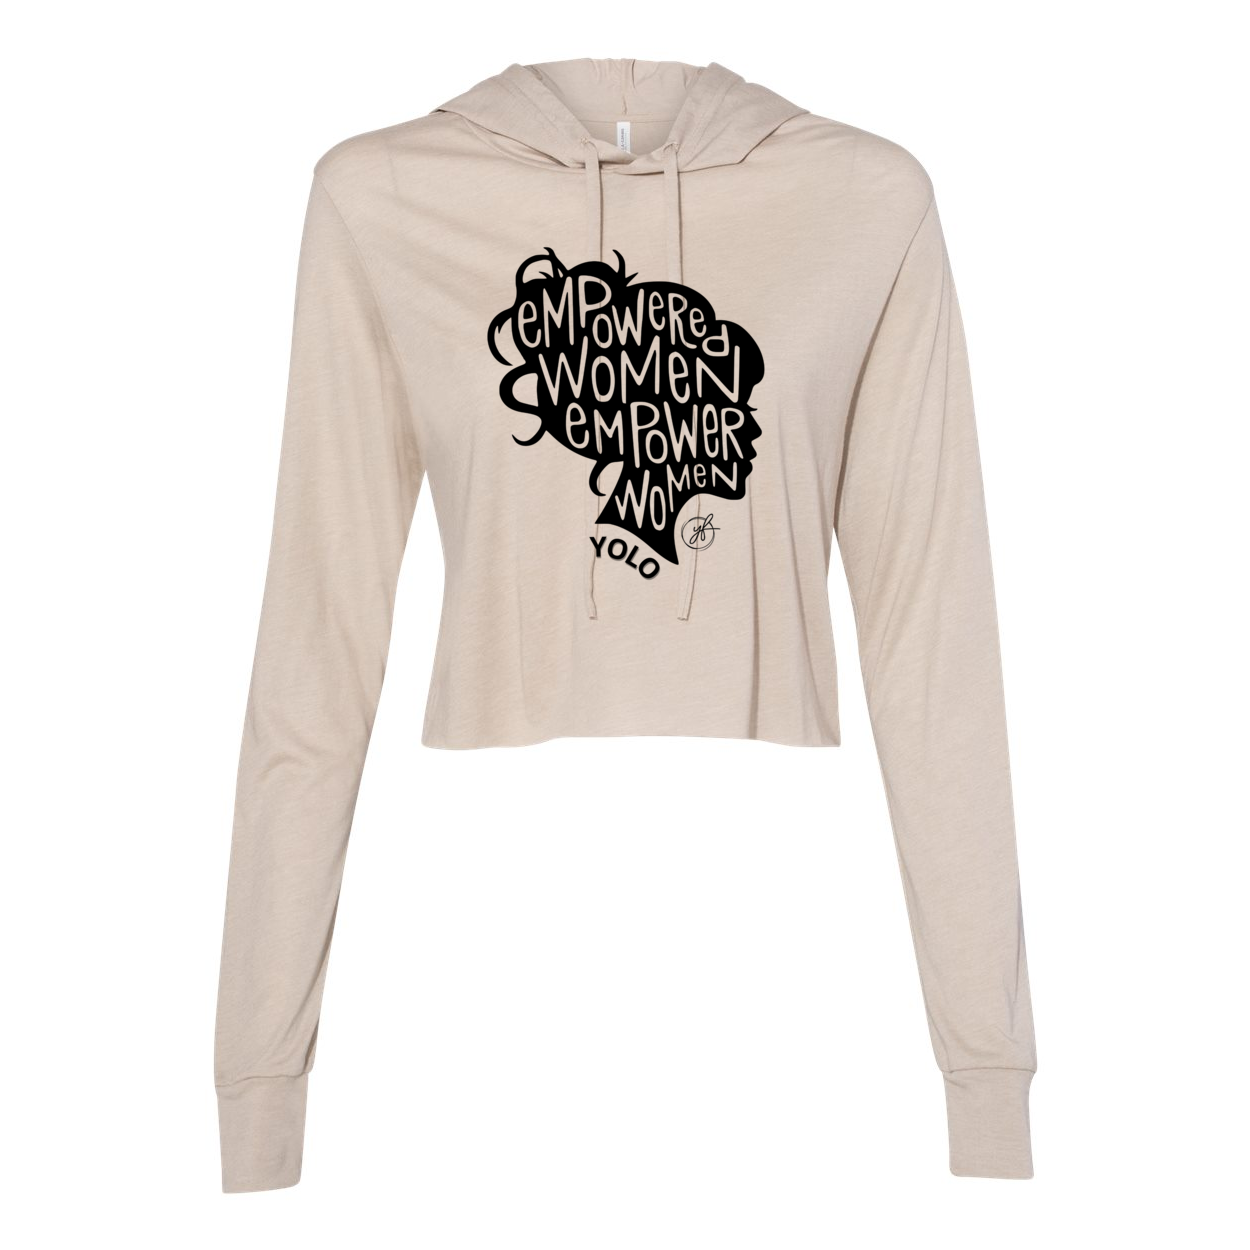 YOLO FITTED'S LS "EMPOWERED WOMEN" CROPPED HOODIE